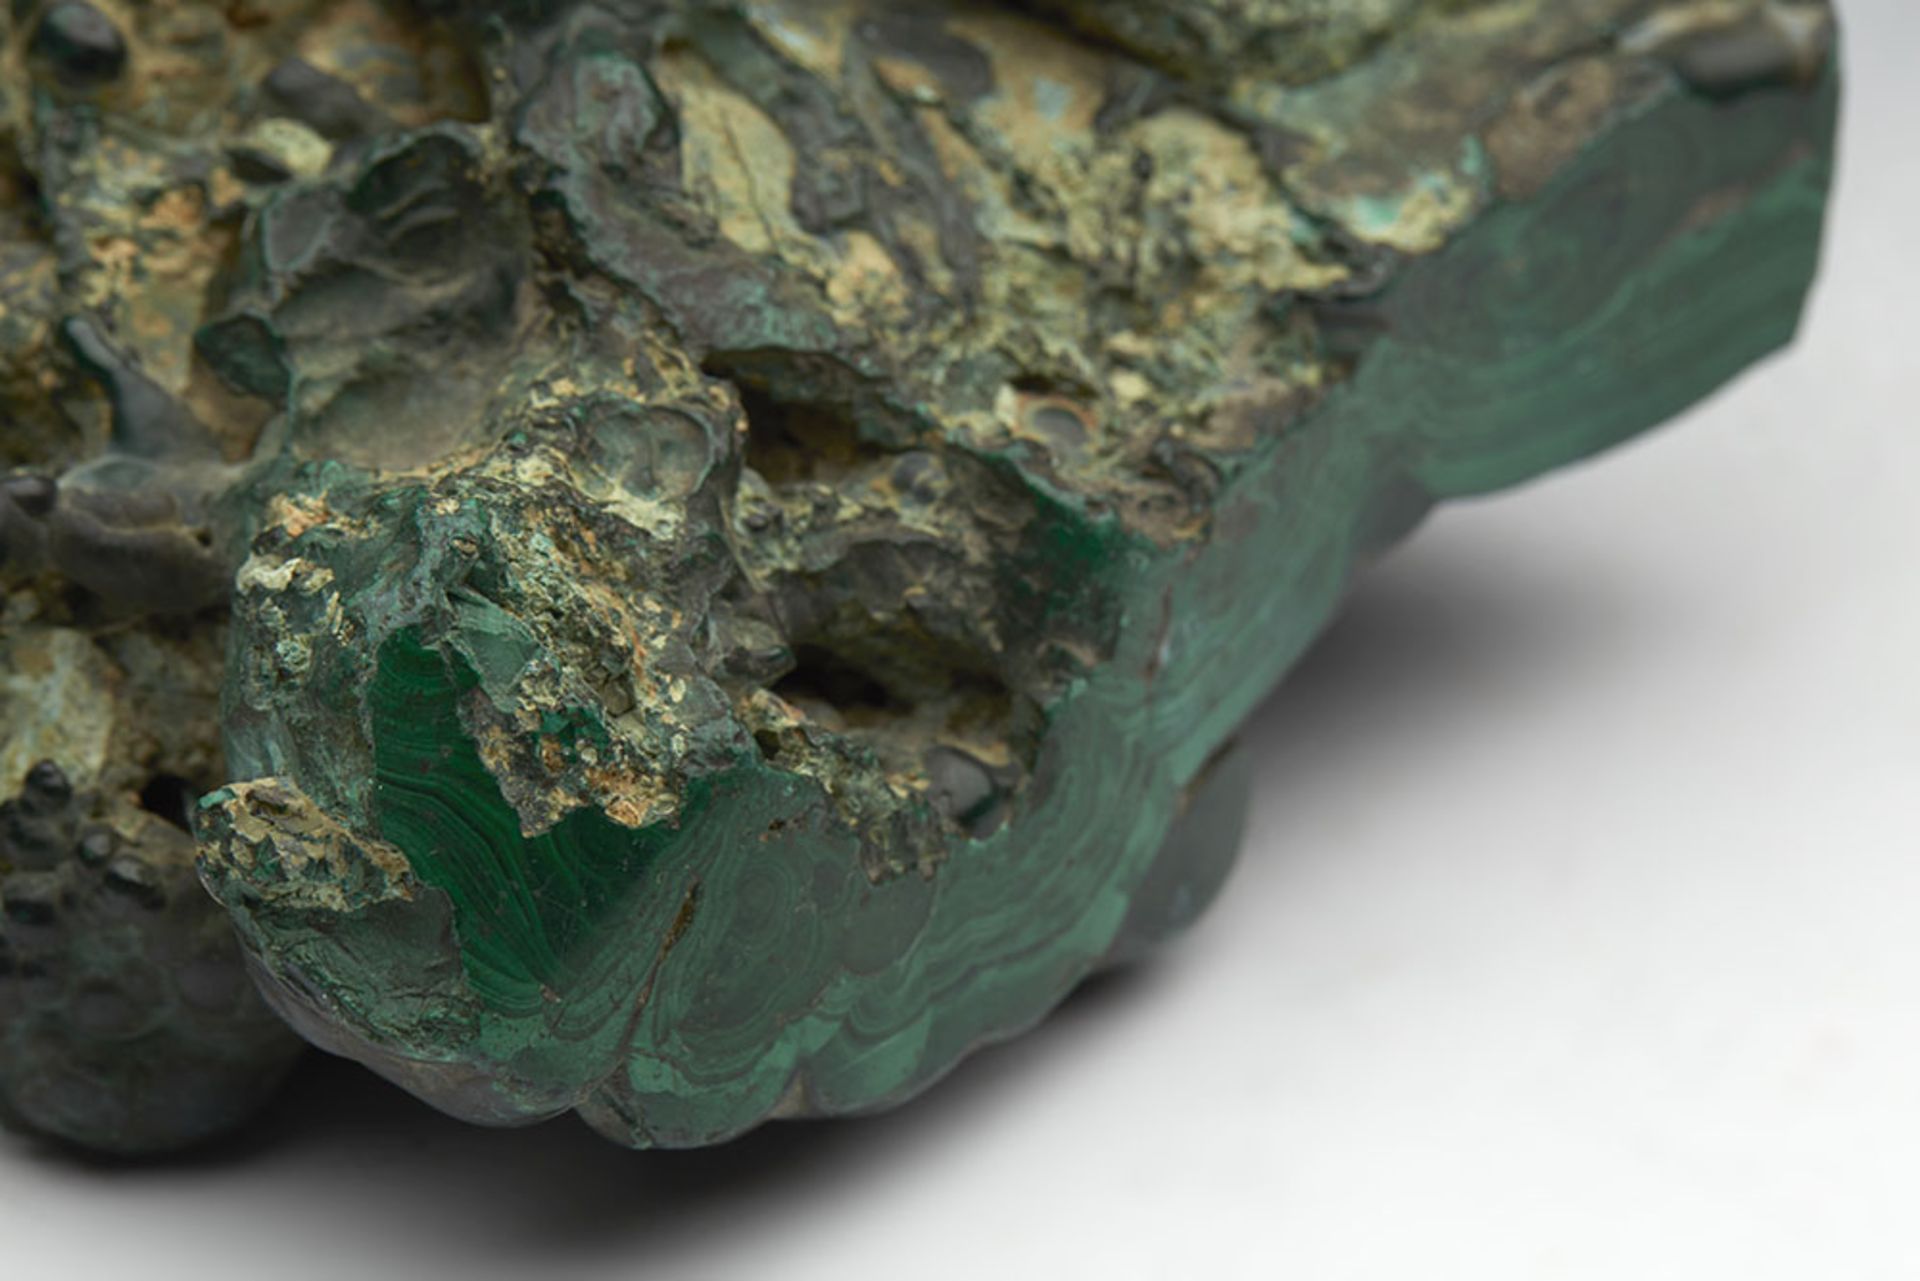 FOREST GREEN FIBROUS MALACHITE ROCK WITH POLISHED SIDES - Image 7 of 10